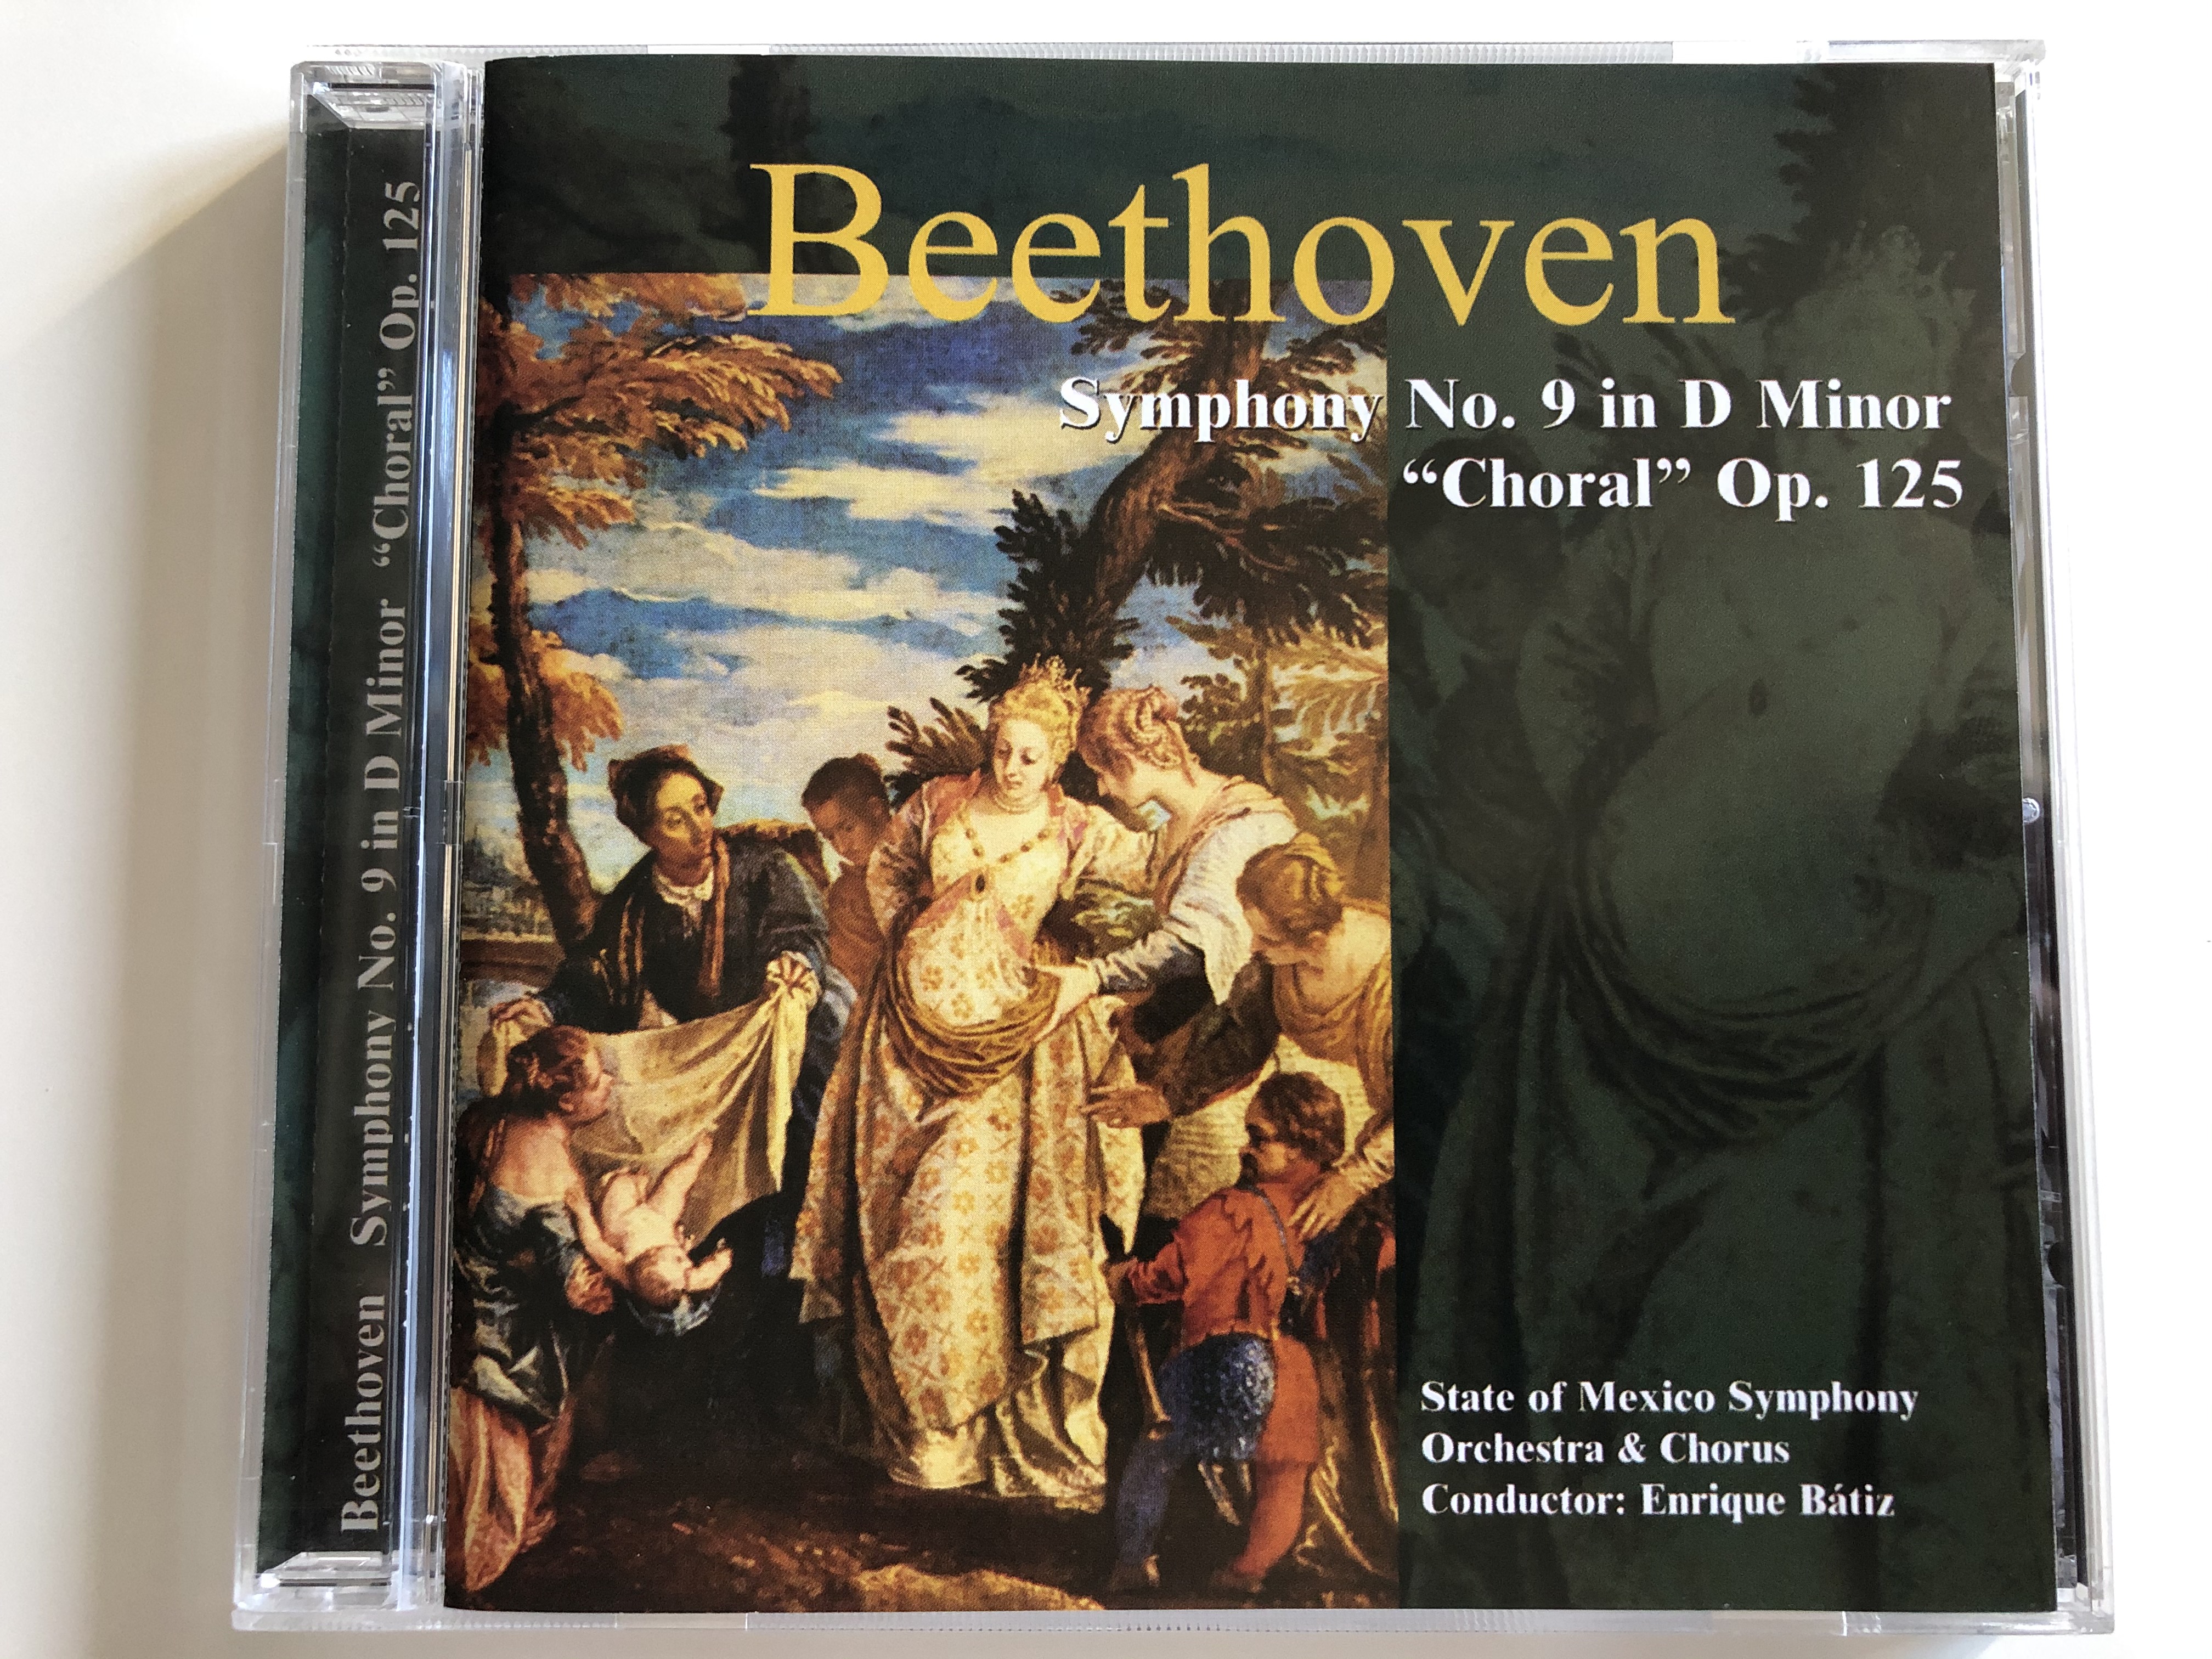 beethoven-symphony-no.-9-in-d-minor-choral-op.-125-state-of-mexico-symphony-orchestra-chorus-conductor-enrique-batiz-a-play-classics-audio-cd-2001-9036-2-1-.jpg